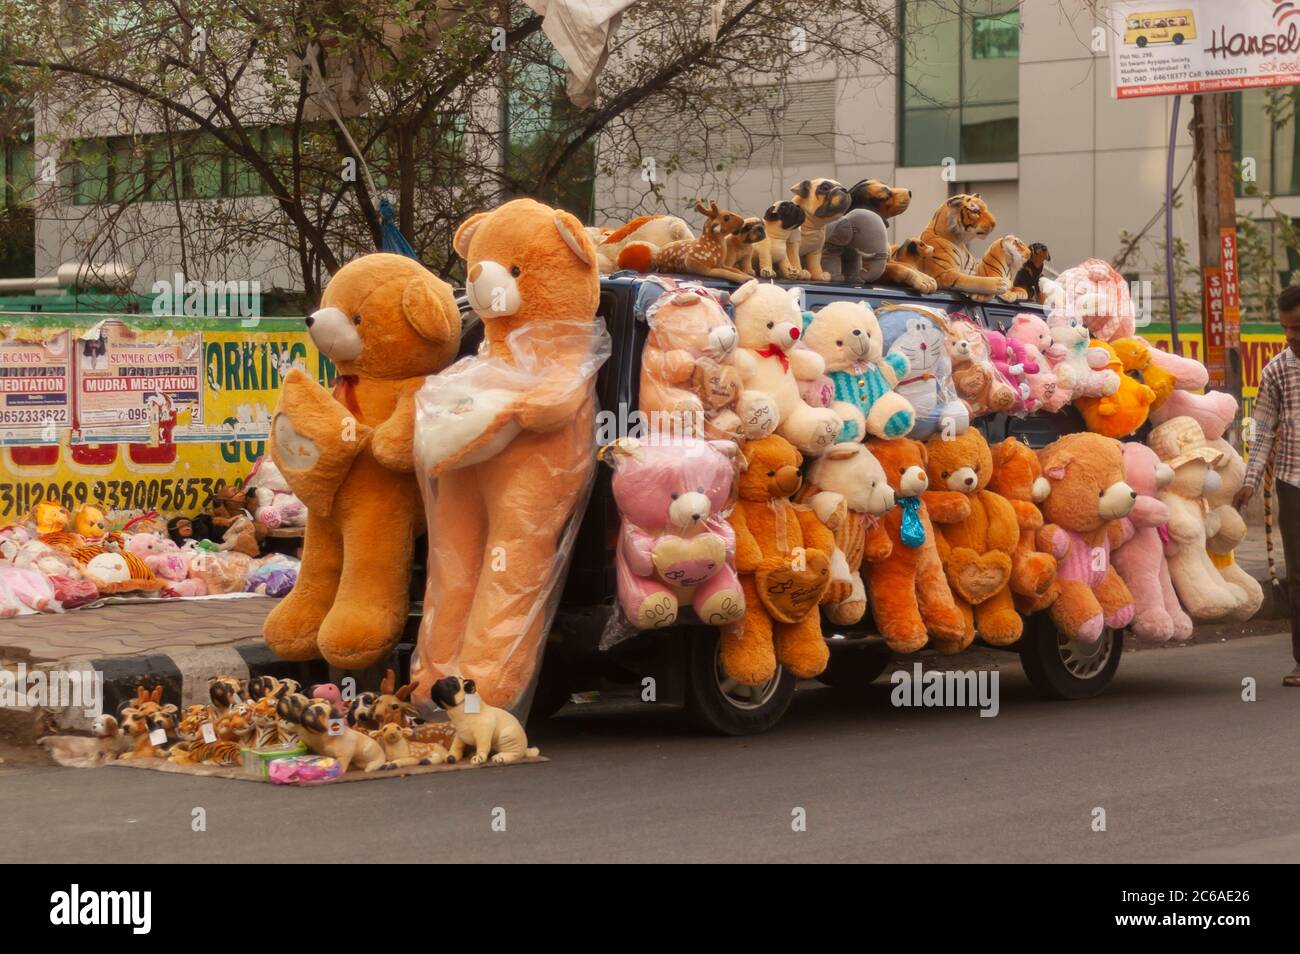 Fluffy Toys High Resolution Stock Photography and Images - Alamy